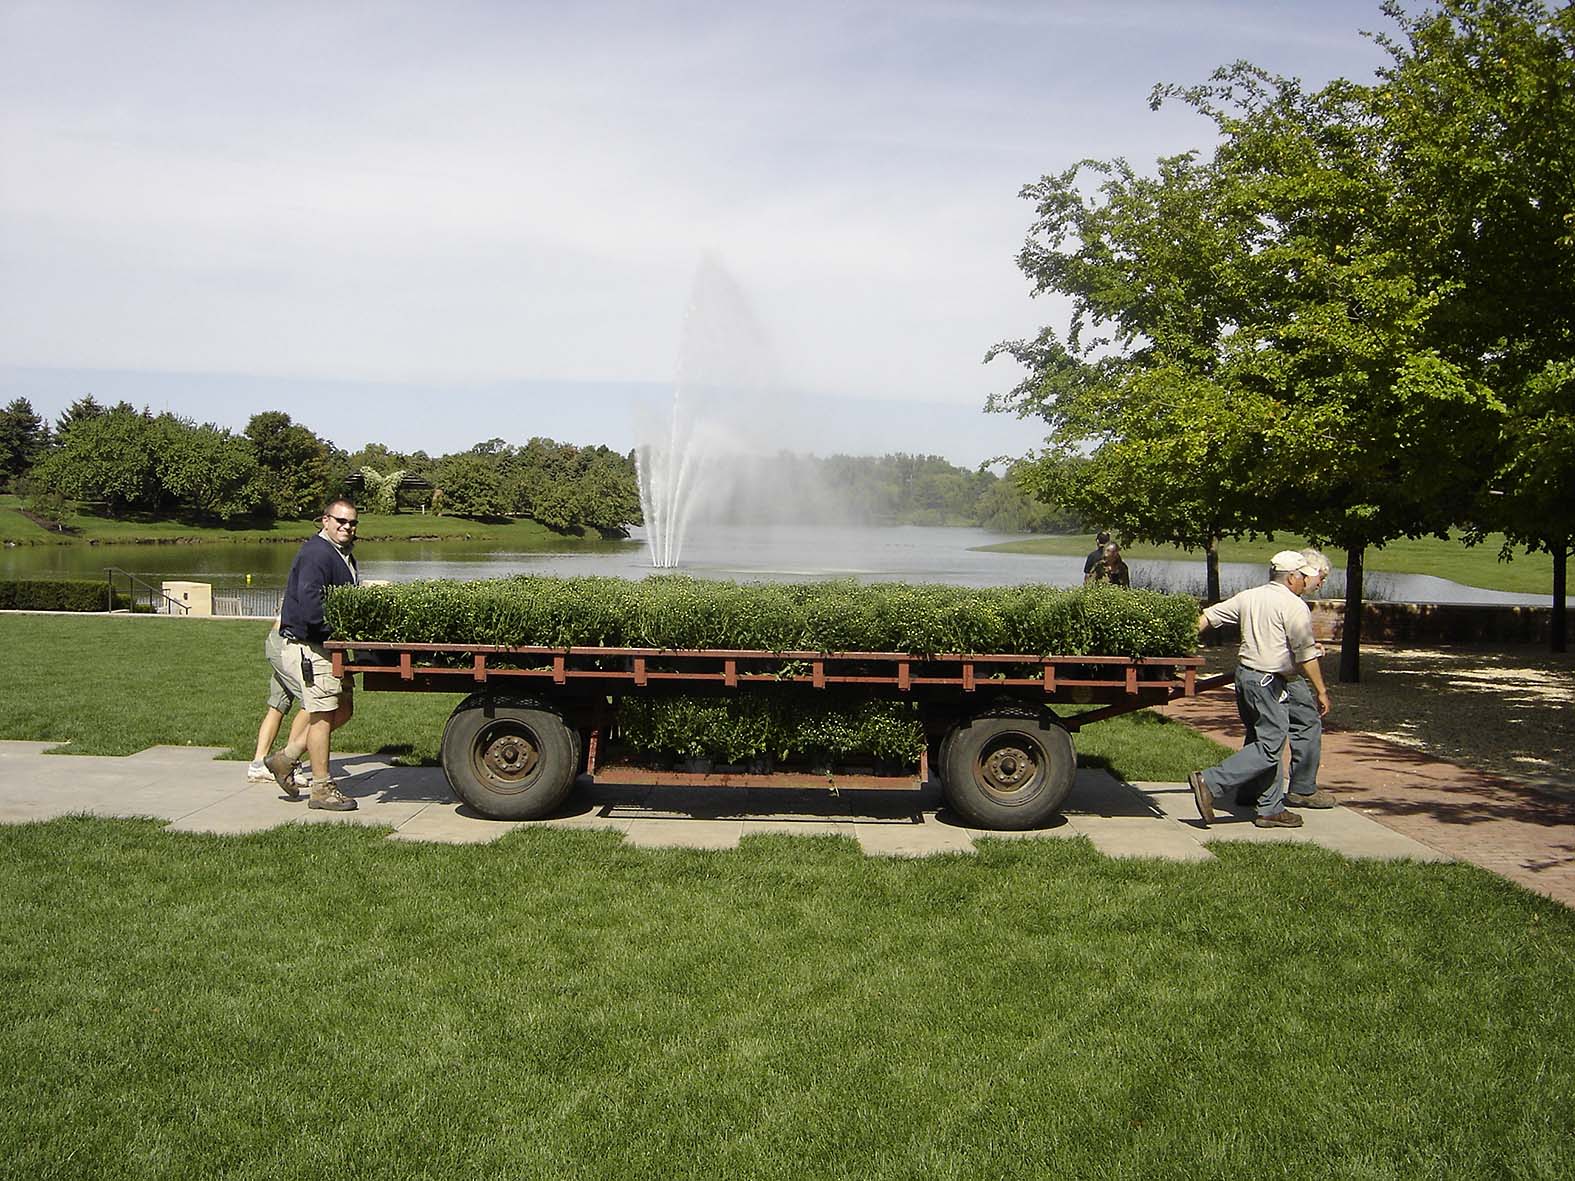 PHOTO: Garden staff are moving a large wagon loaded with potted mums to be transplanted in the Circle garden.